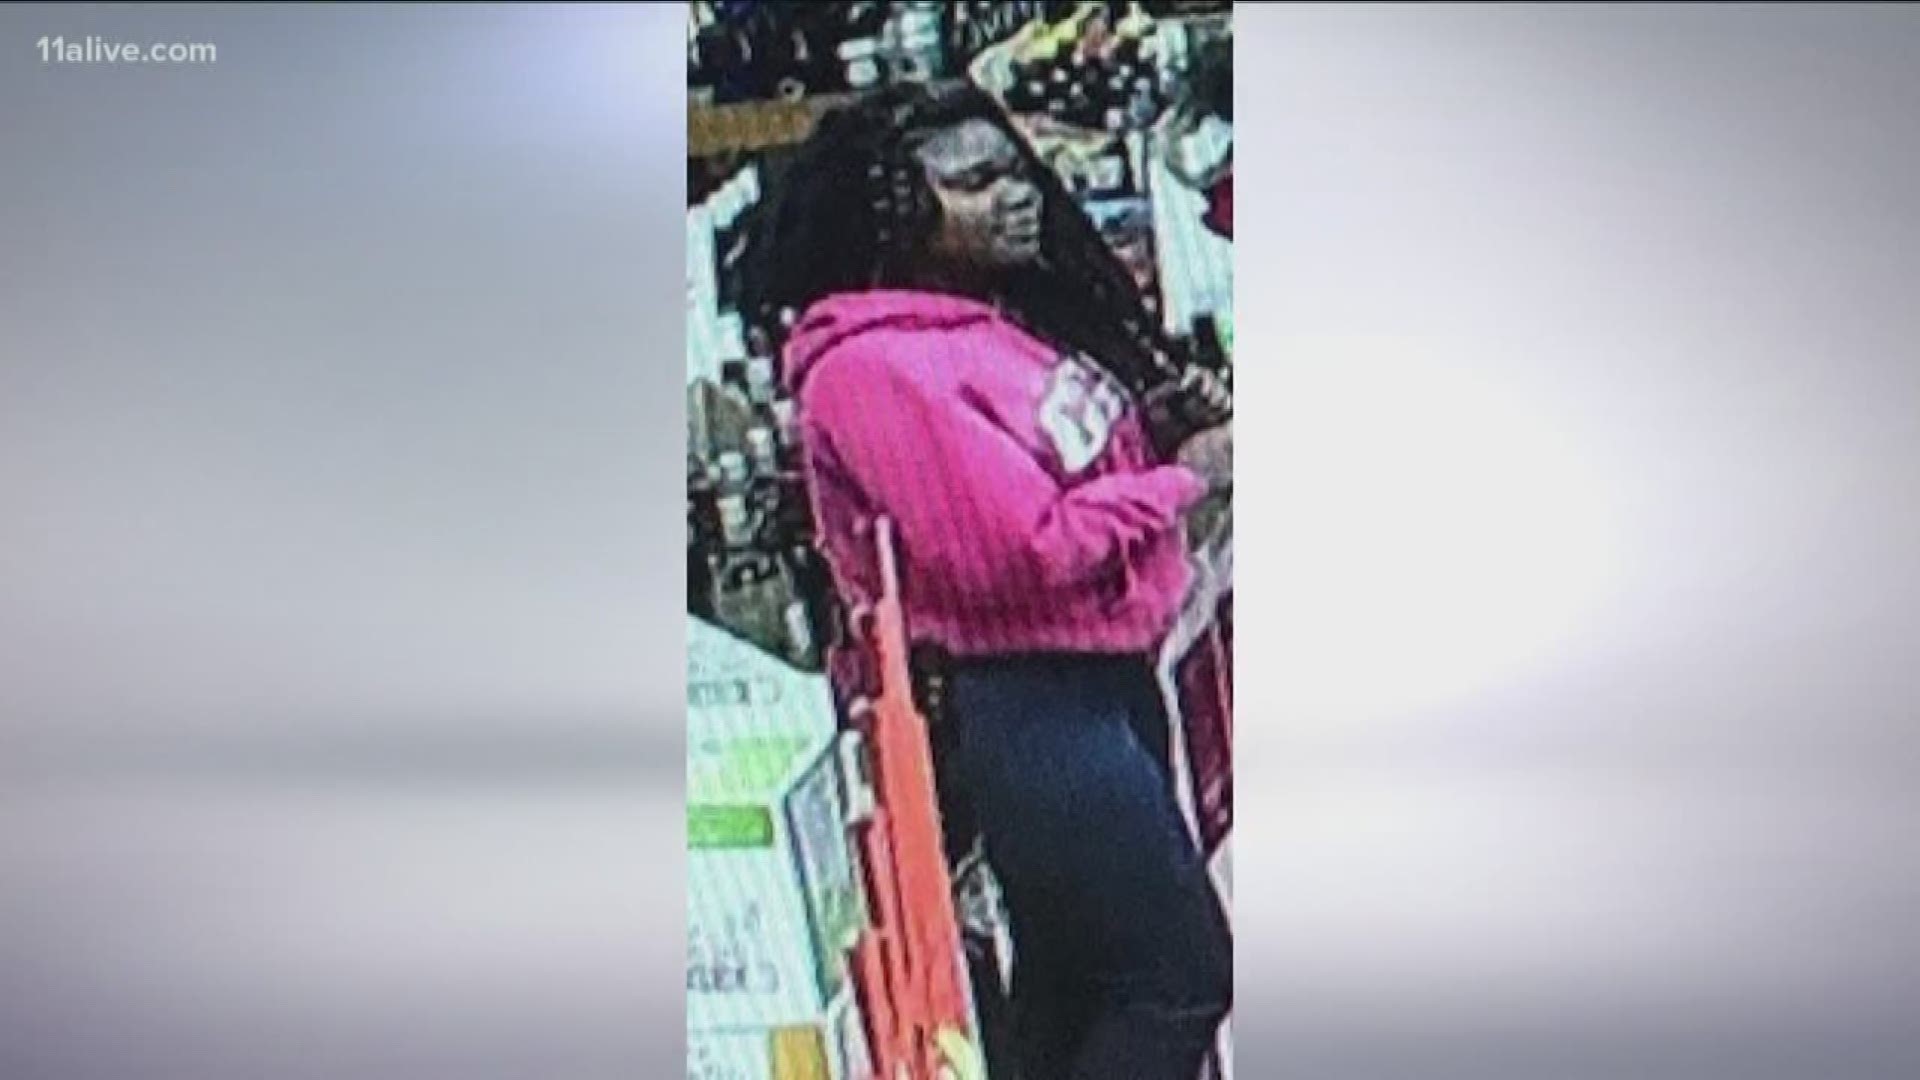 On Tuesday, Atlanta Police investigators distributed several photos of Alexis Crawford, showing her inside a liquor store off Ralph David Abernathy Boulevard.